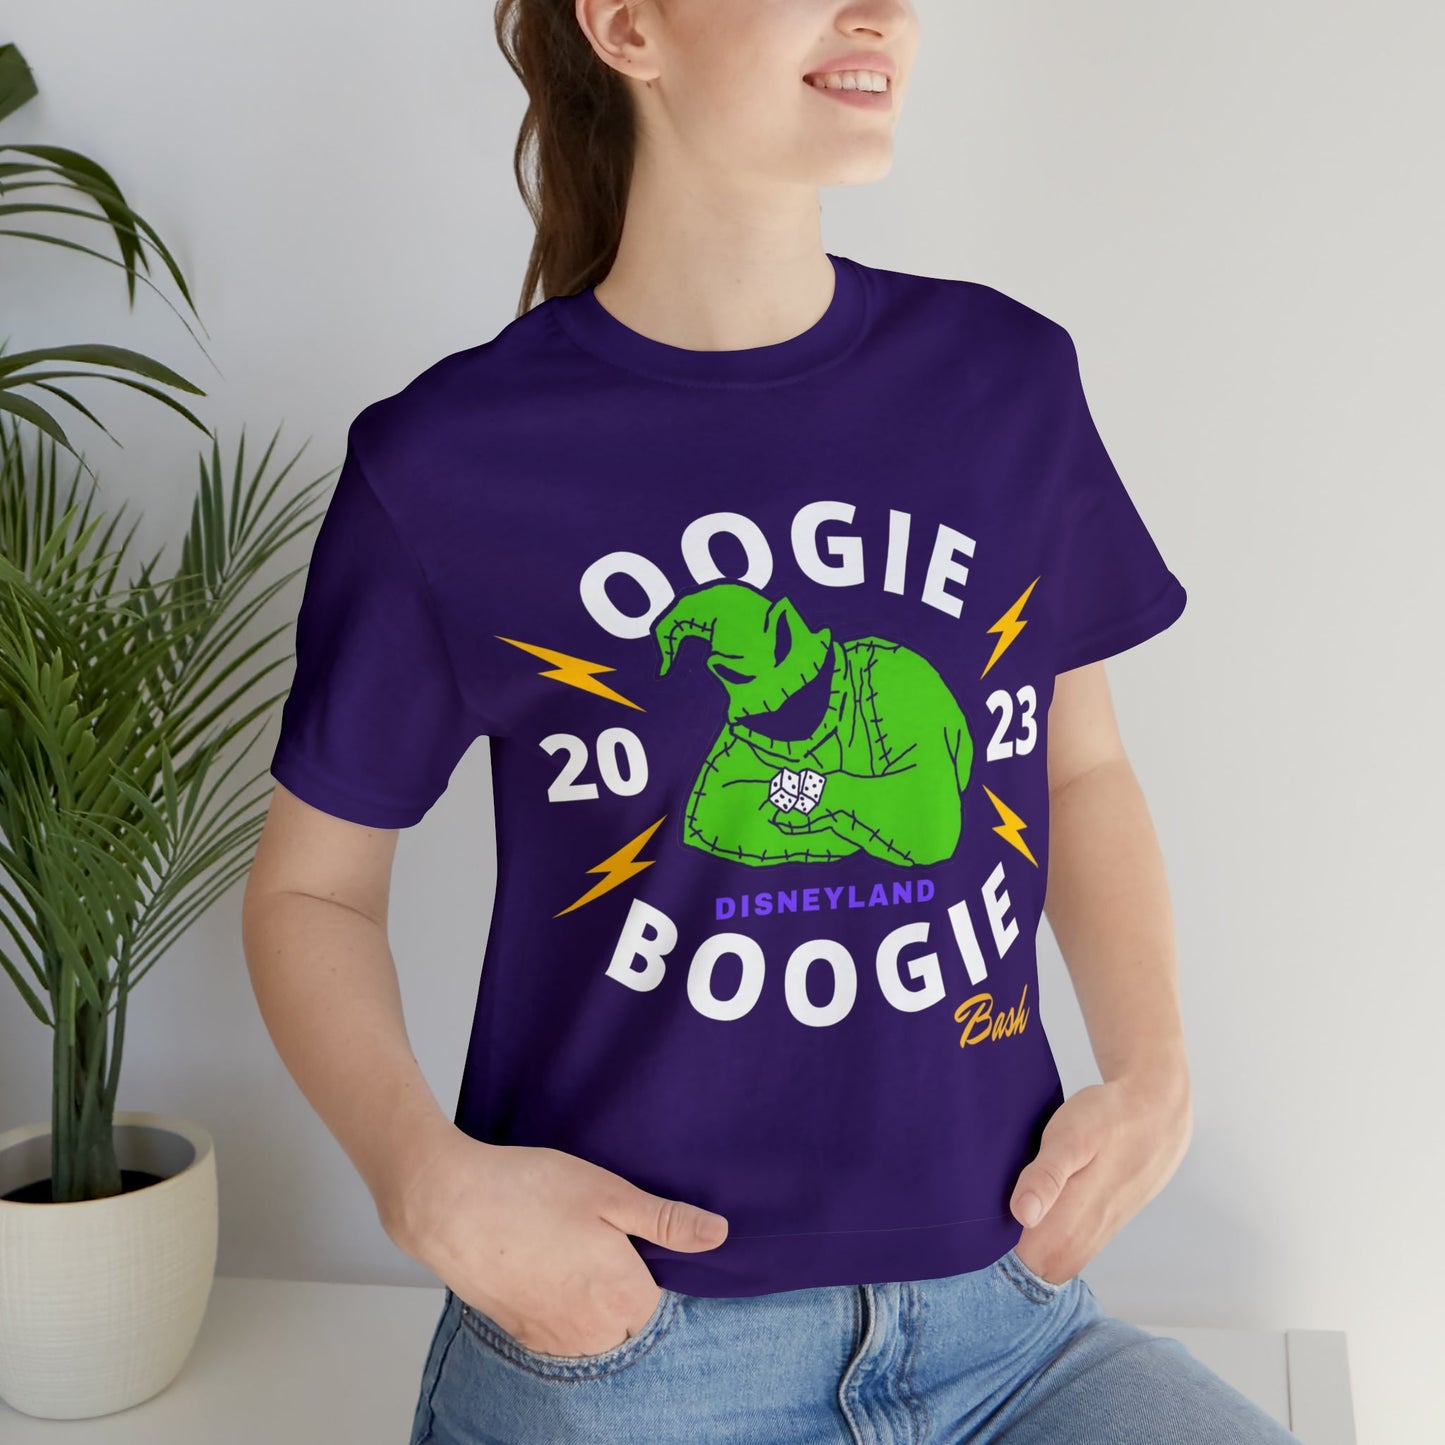 Oogie Boogie Bash T-Shirt, Unisex Tee Classic Fit